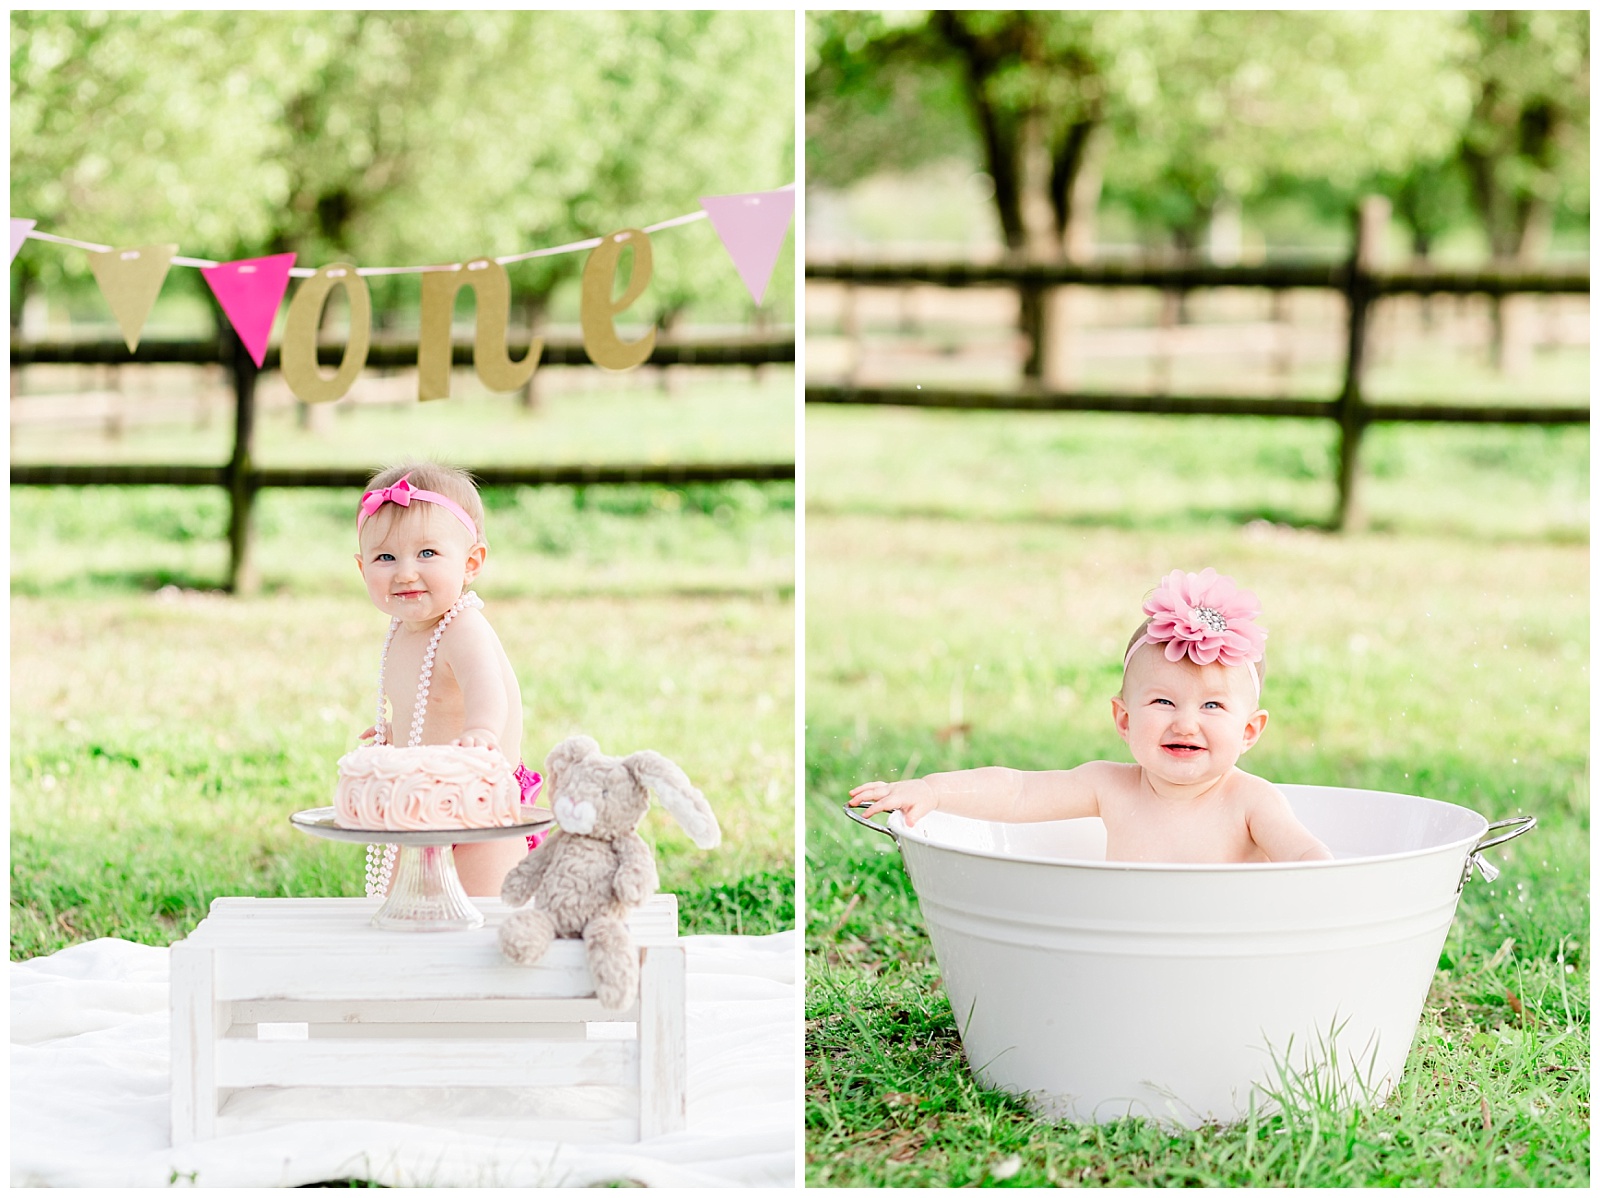 Cake Smash and One Year Old Birthday Session for Baby Girl with Different Shades of Pink, A Pink Cake and Pink Balloon